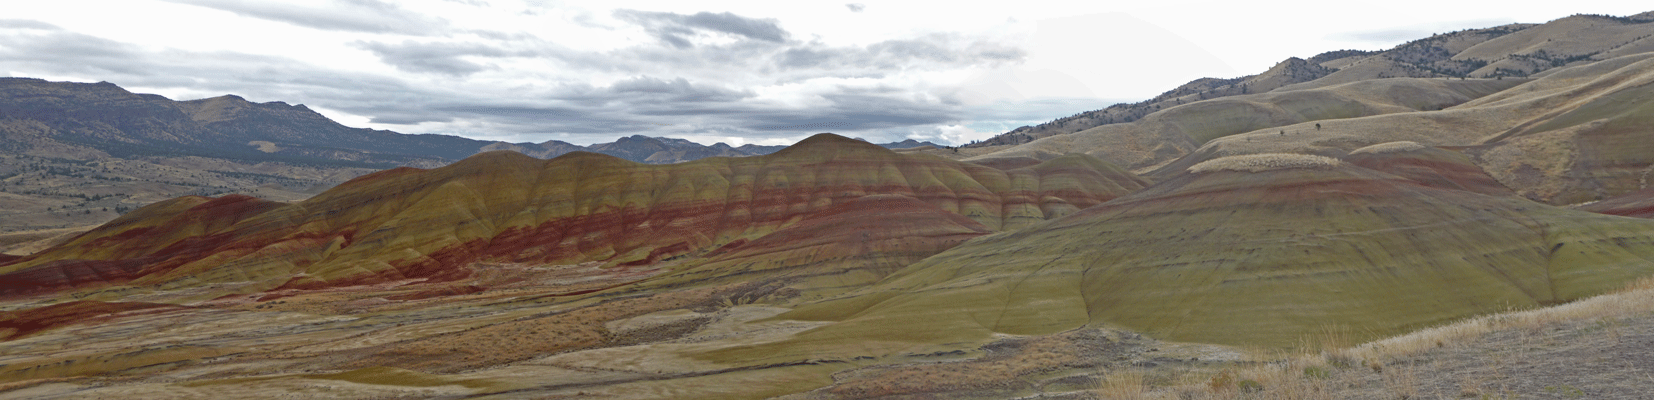 Painted Hills John Day OR